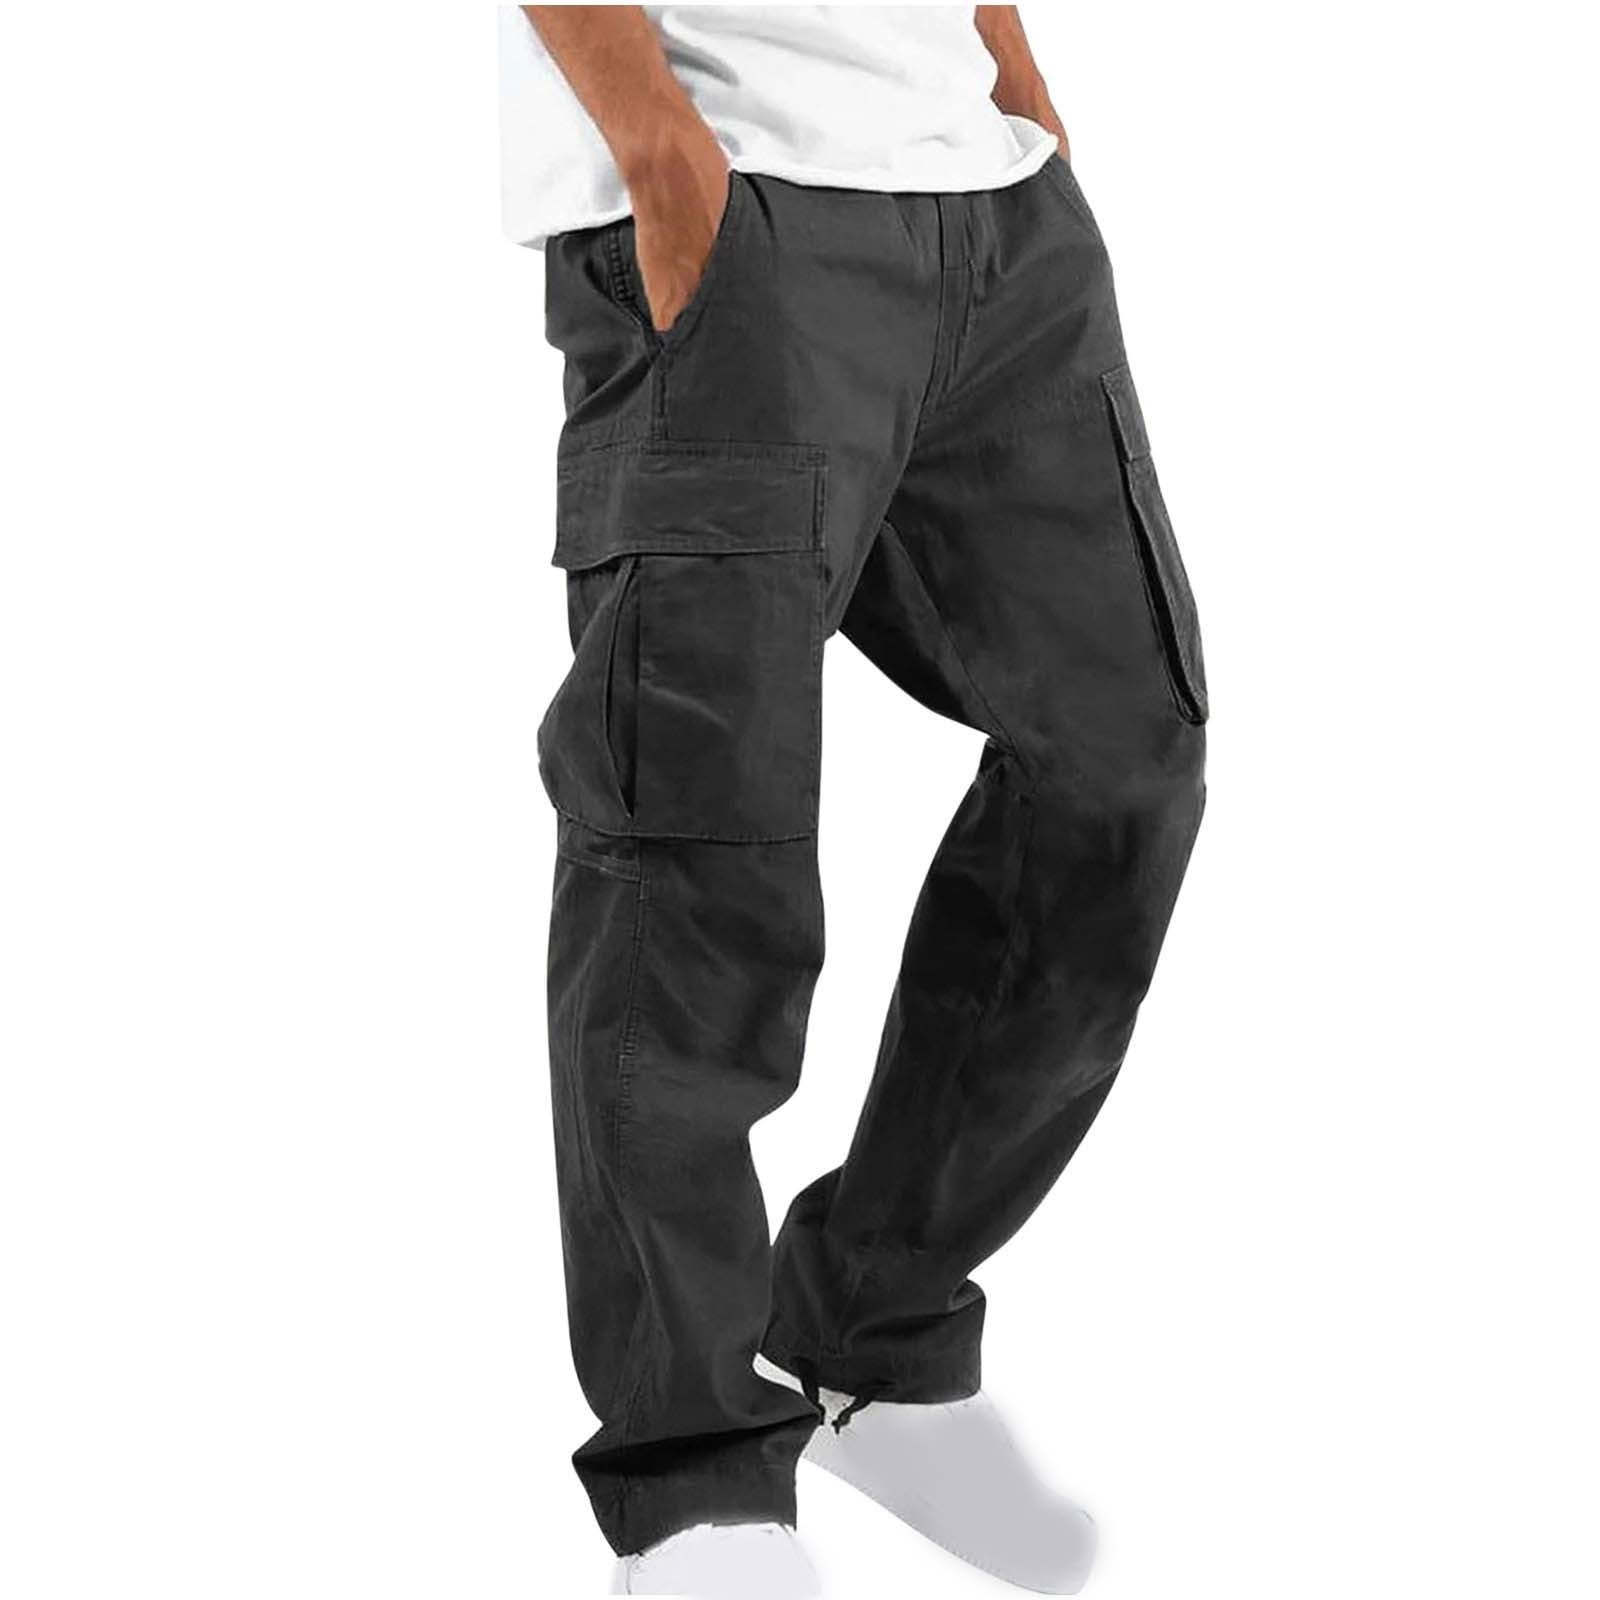 FAVIPT Men's Athletic Pants Thin Lightweight Quick Dry Zipper Pockets  Outdoor Straight Leg Cargo Pants for Men with Multi Pockets Suitable  Running